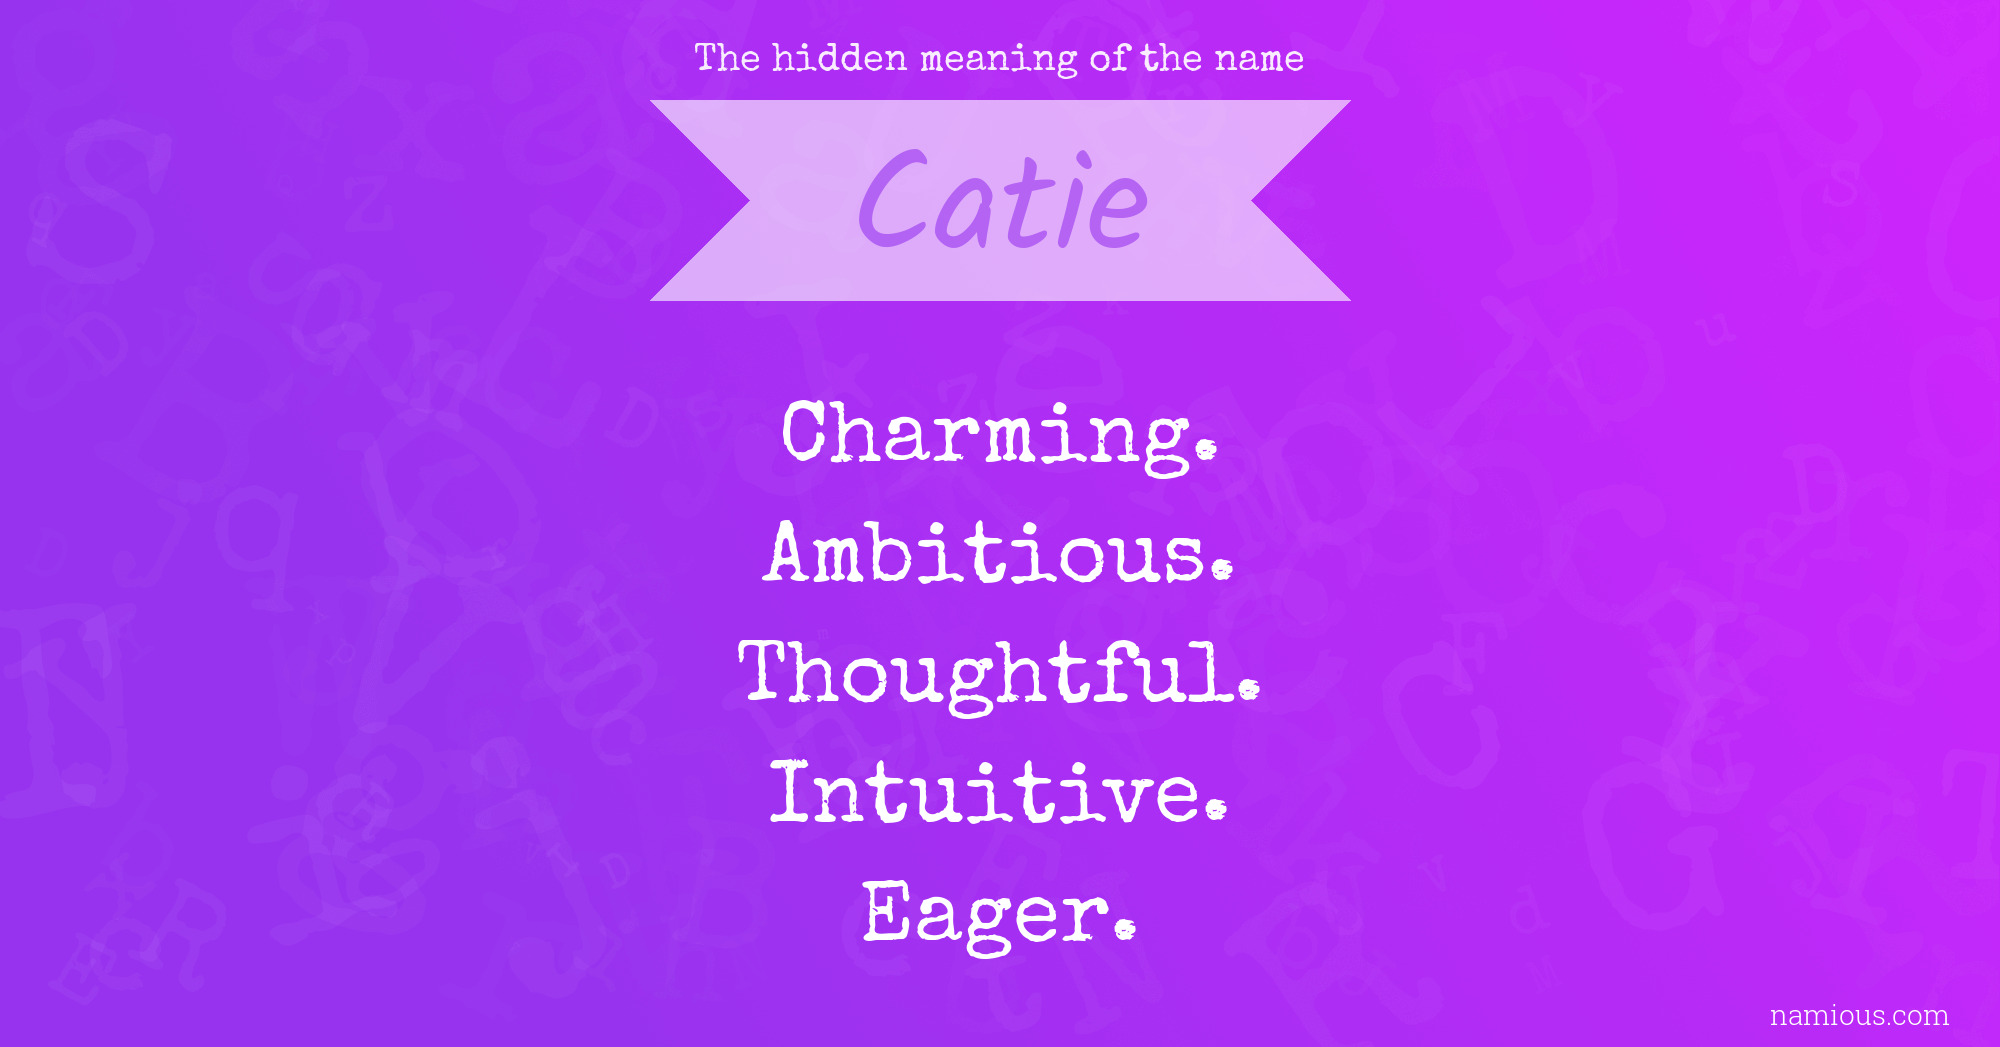 The hidden meaning of the name Catie